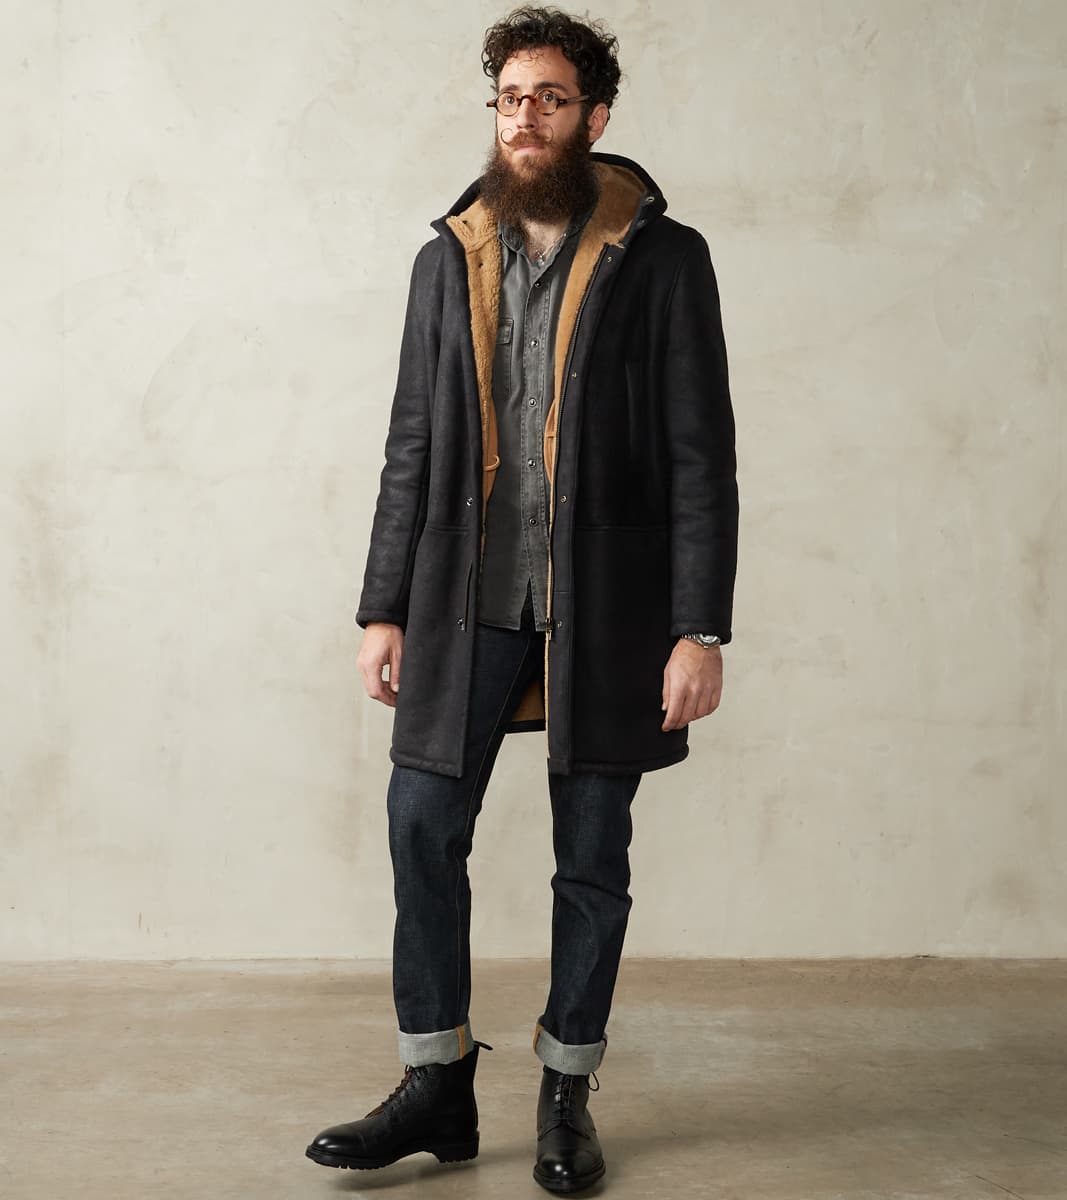 Cromford Leather and Permanent Style's collaboration luxury shearling coat